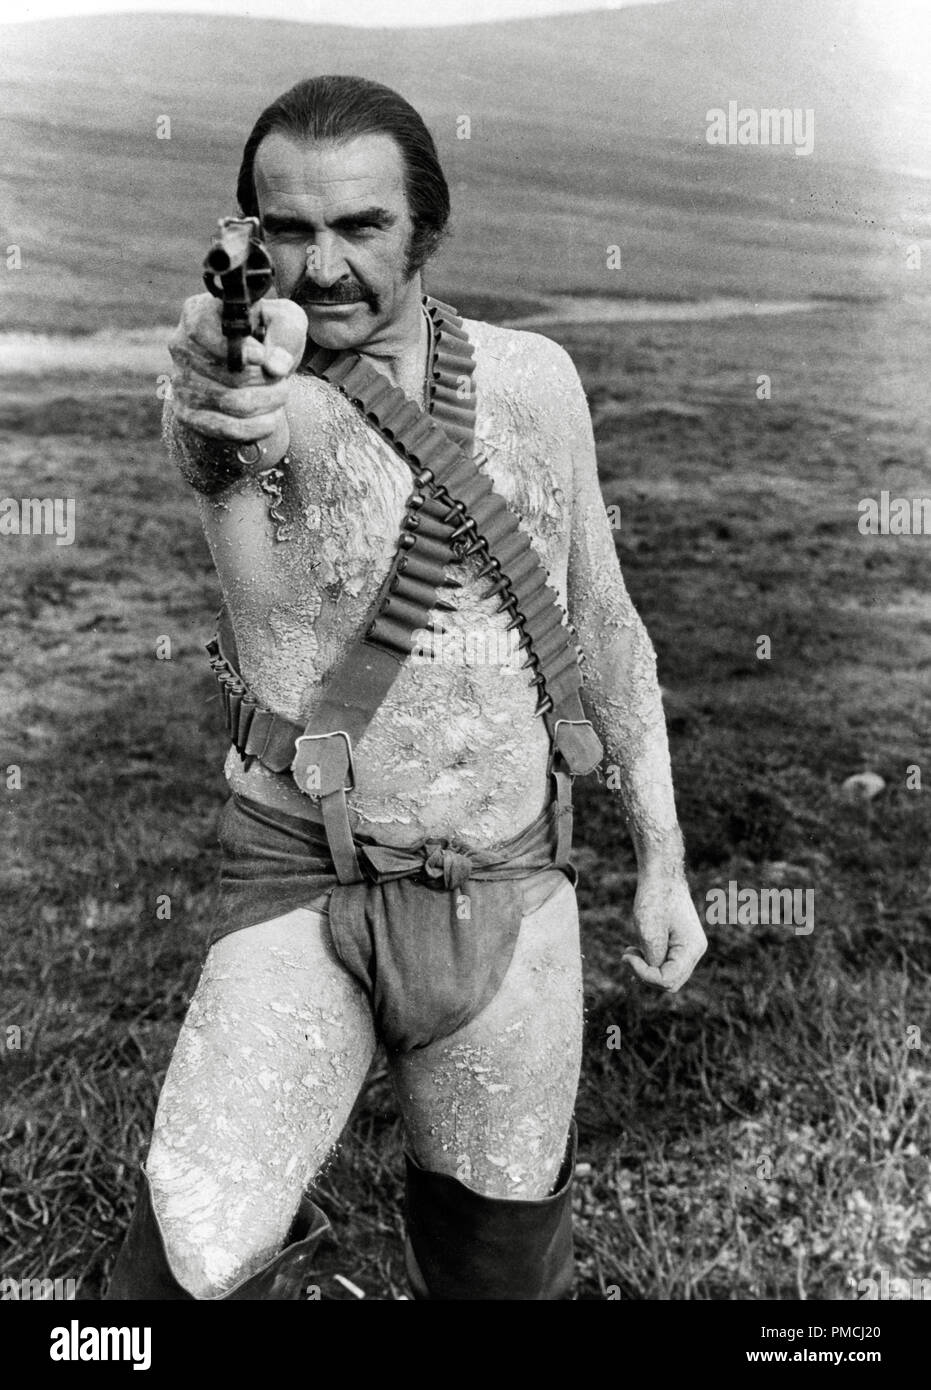 Sean Connery,  'Zardoz'  (1974) 20th Century Fox   File Reference # 33650 162THA  For Editorial Use Only -  All Rights Reserved Stock Photo